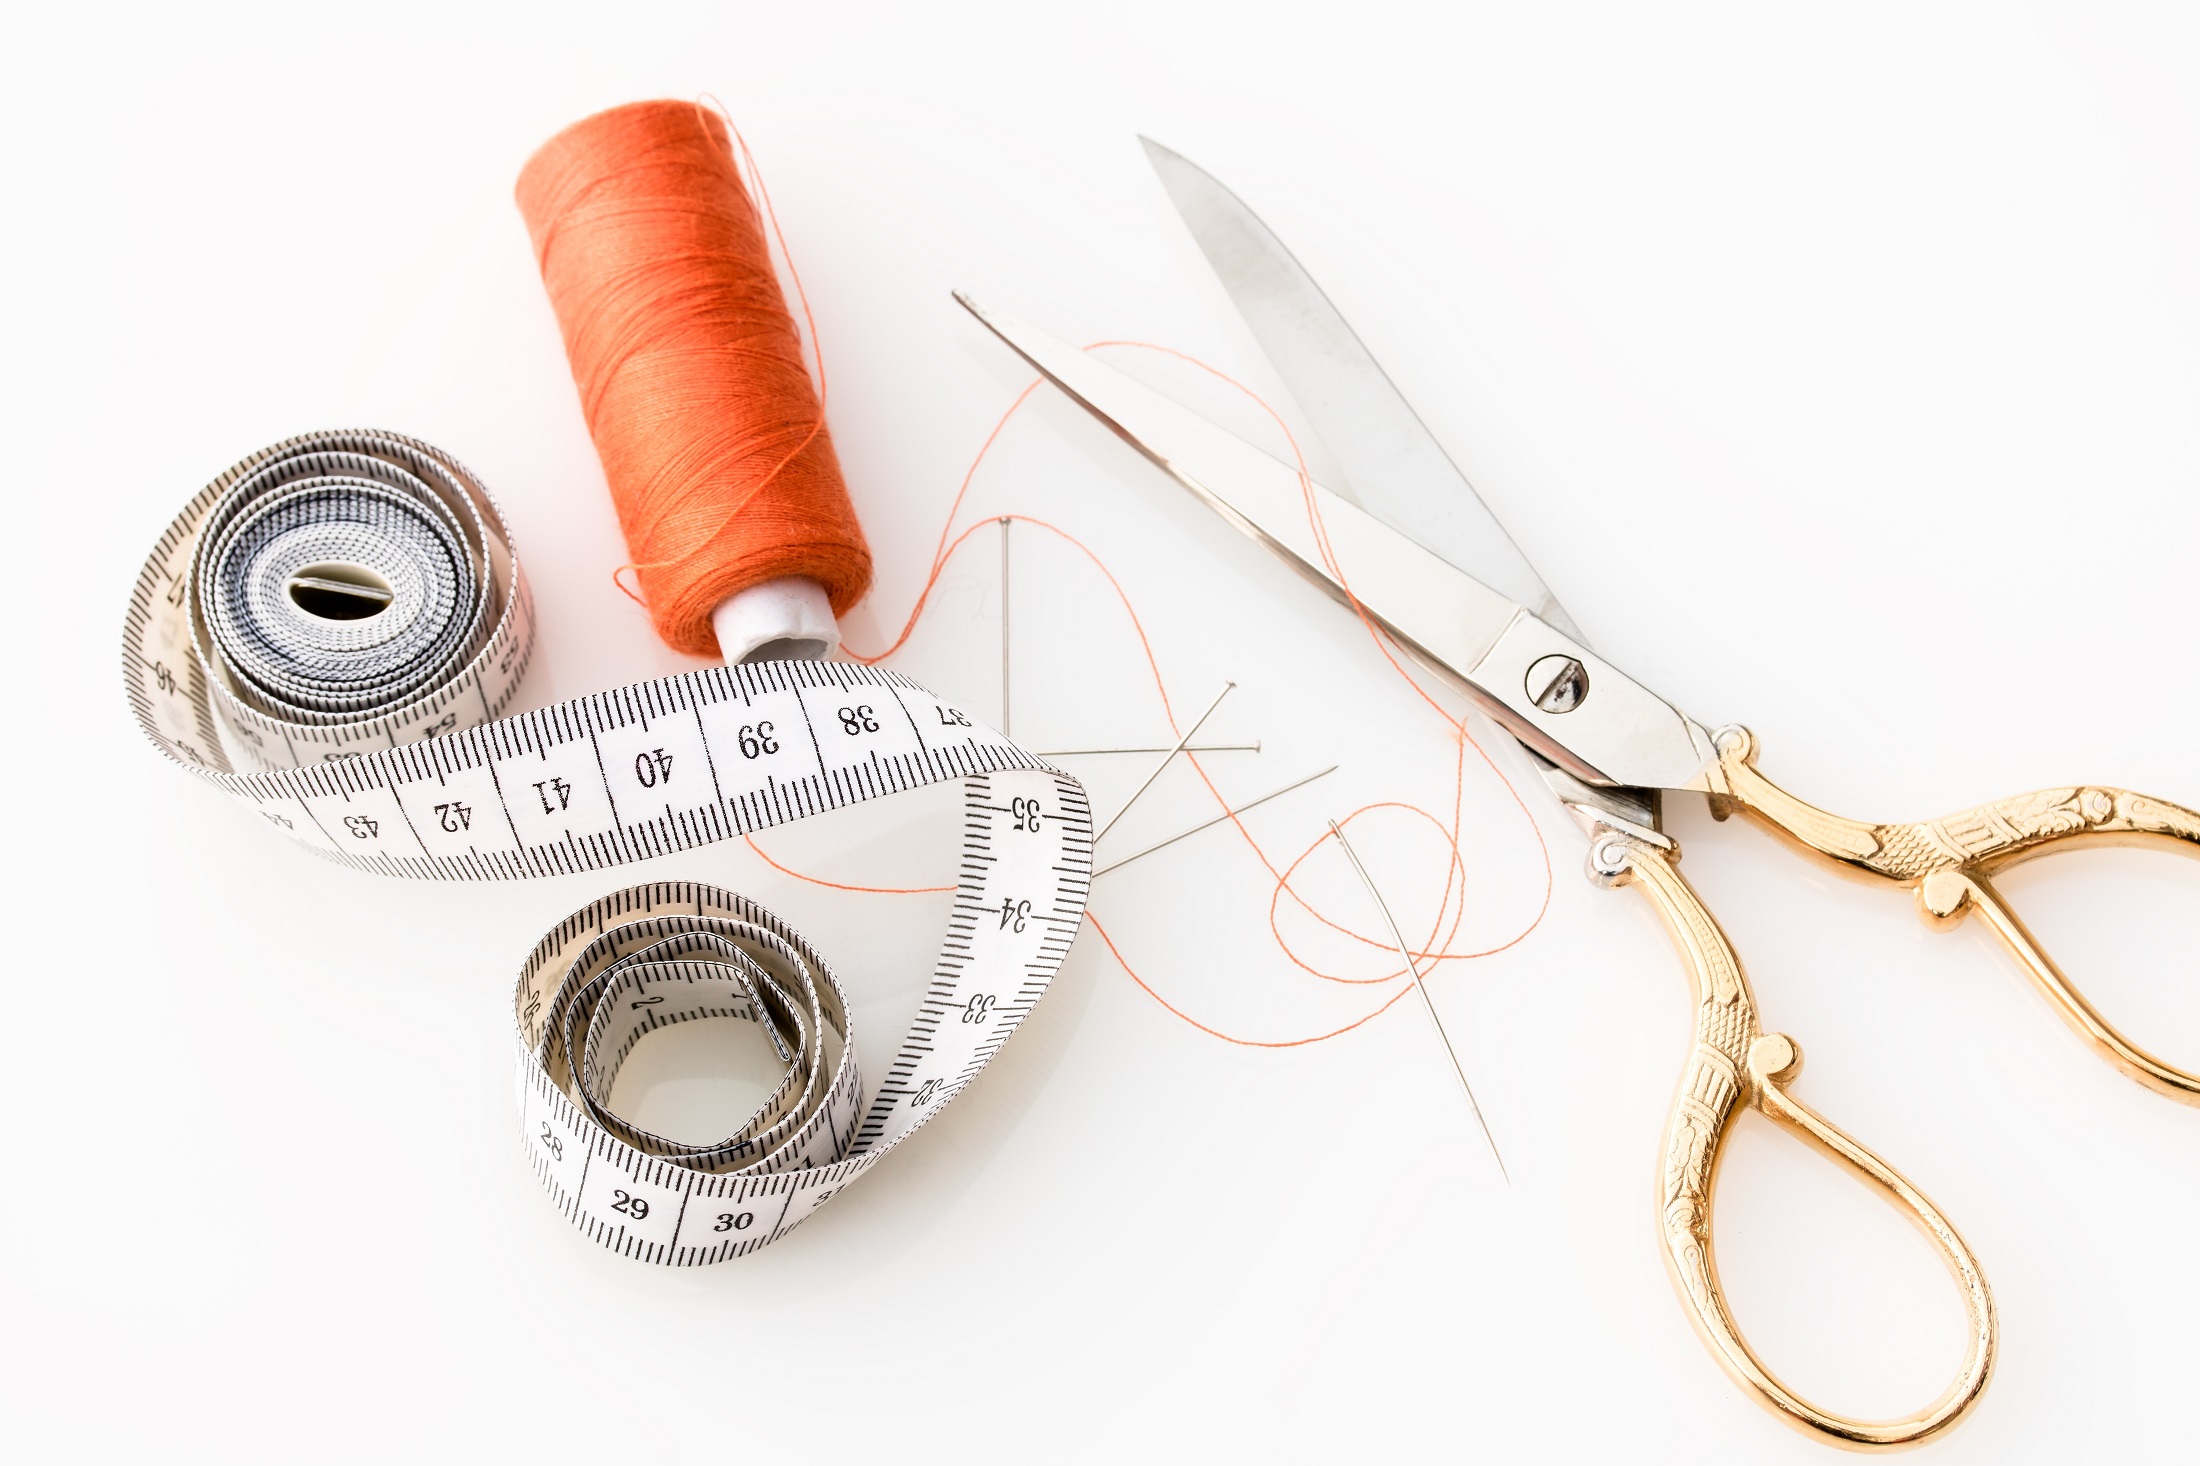 Do you want to sew clothes? These materials will surely come in handy